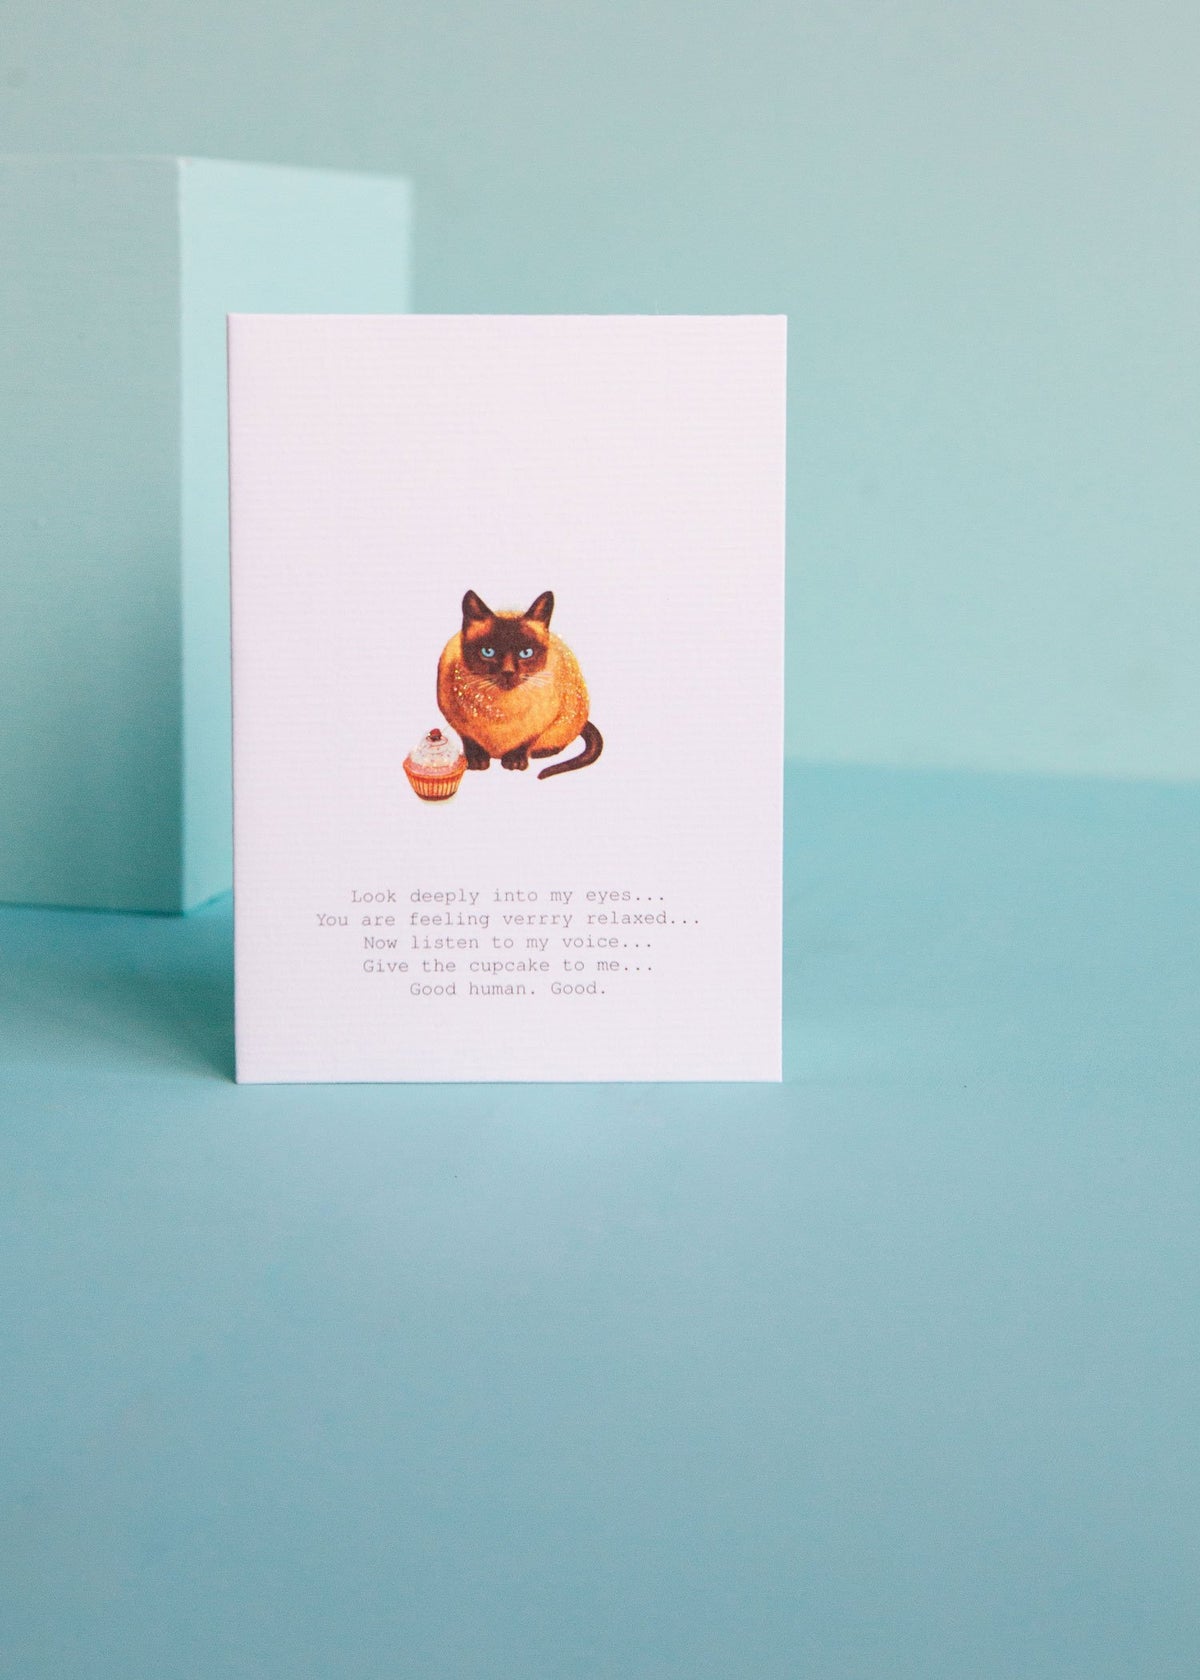 A Margot Elena TokyoMilk Greeting Card featuring an illustration of a cat with hypnotic eyes and a caption that reads, "look deeply into my eyes... you are feeling very sleepyminded... give the cupcake to me